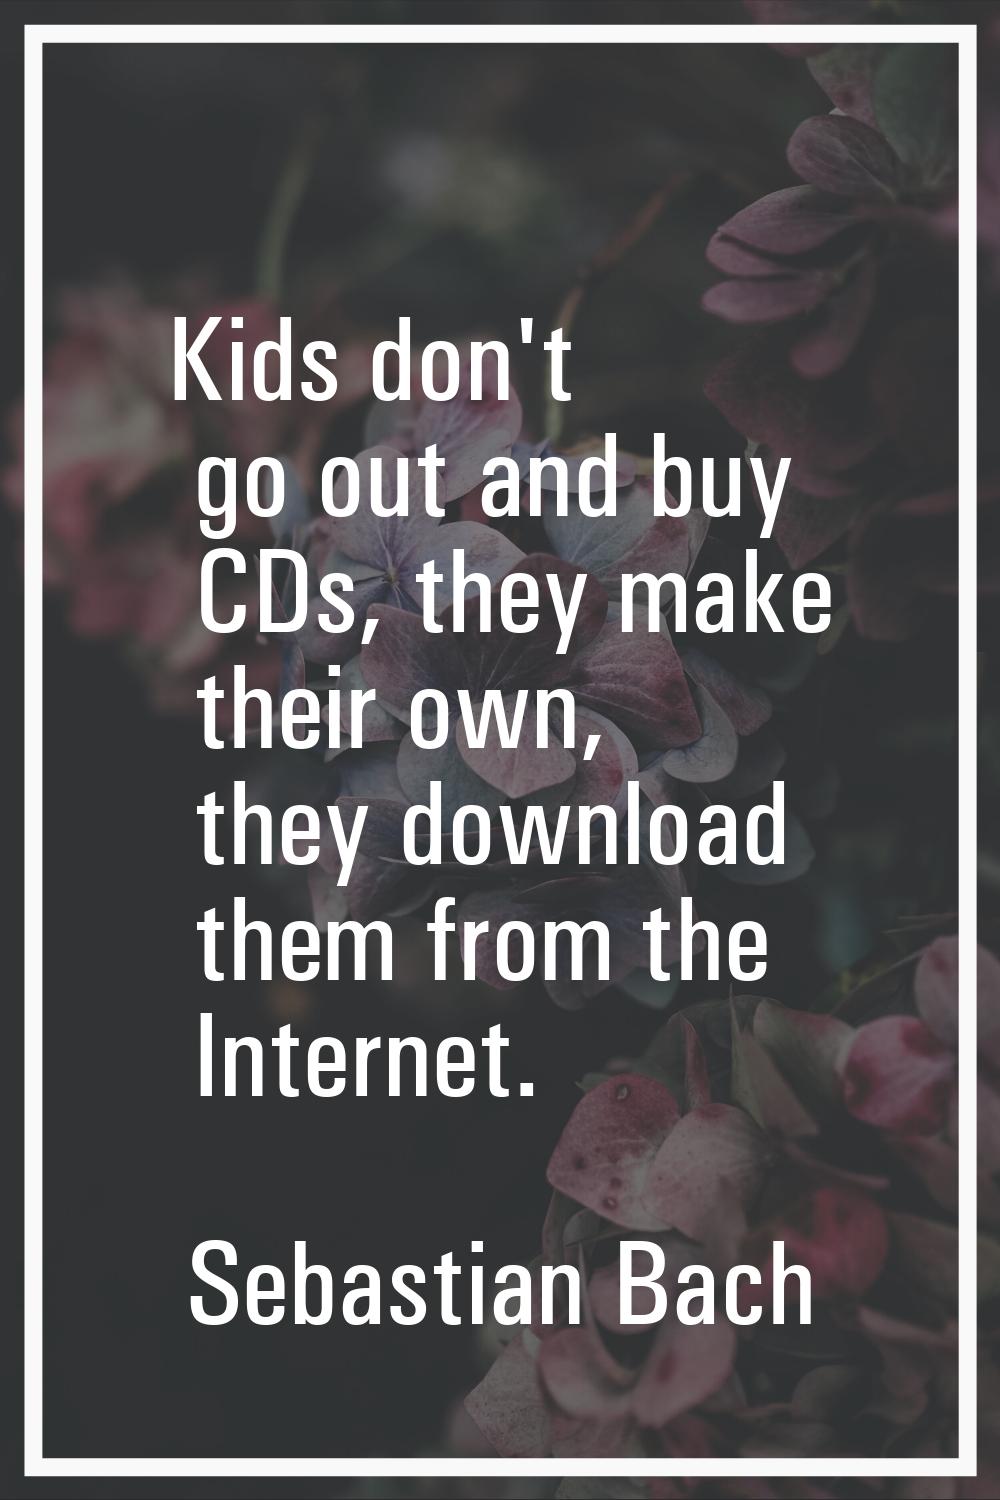 Kids don't go out and buy CDs, they make their own, they download them from the Internet.